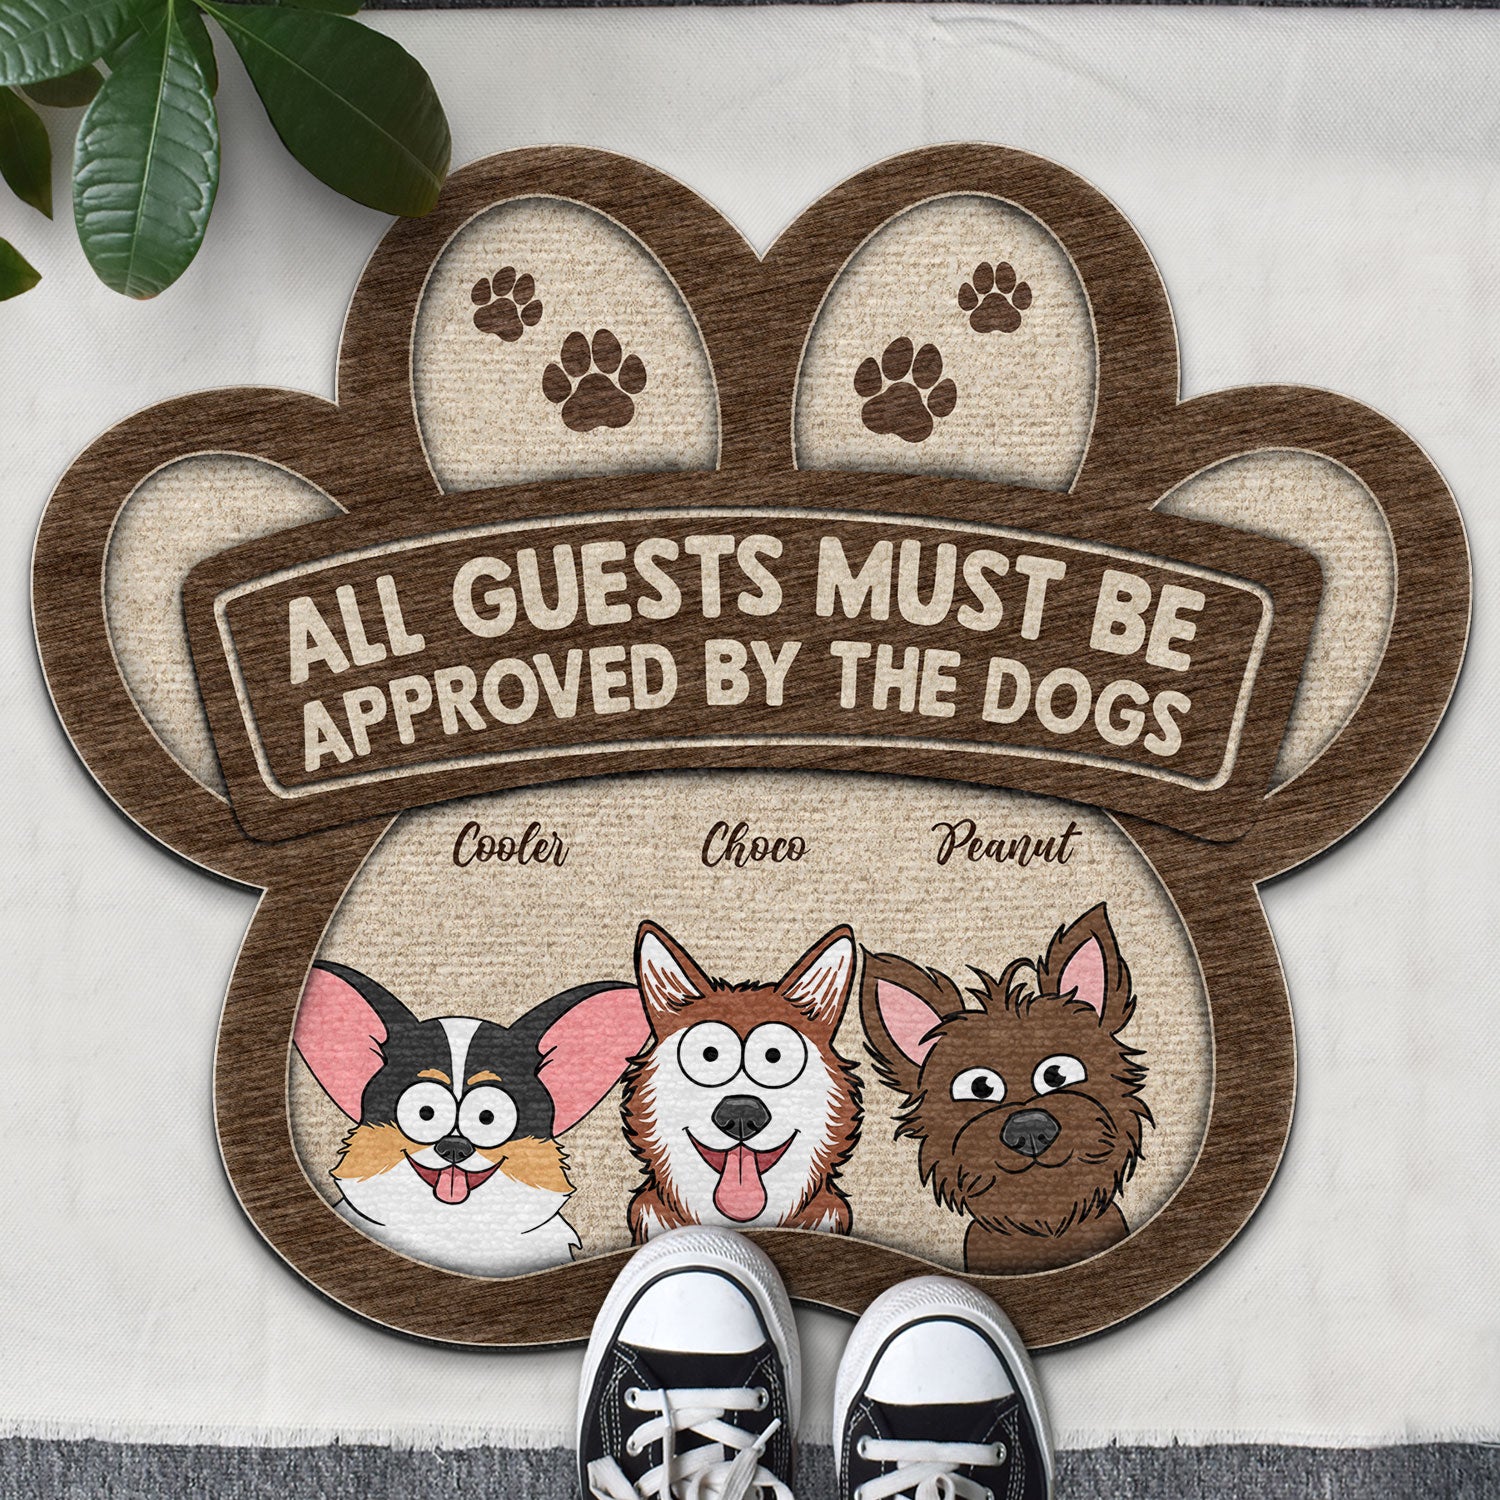 All Guests Must Be Approved By The Dogs - Gift For Dog Lovers - Personalized Custom Shaped Doormat